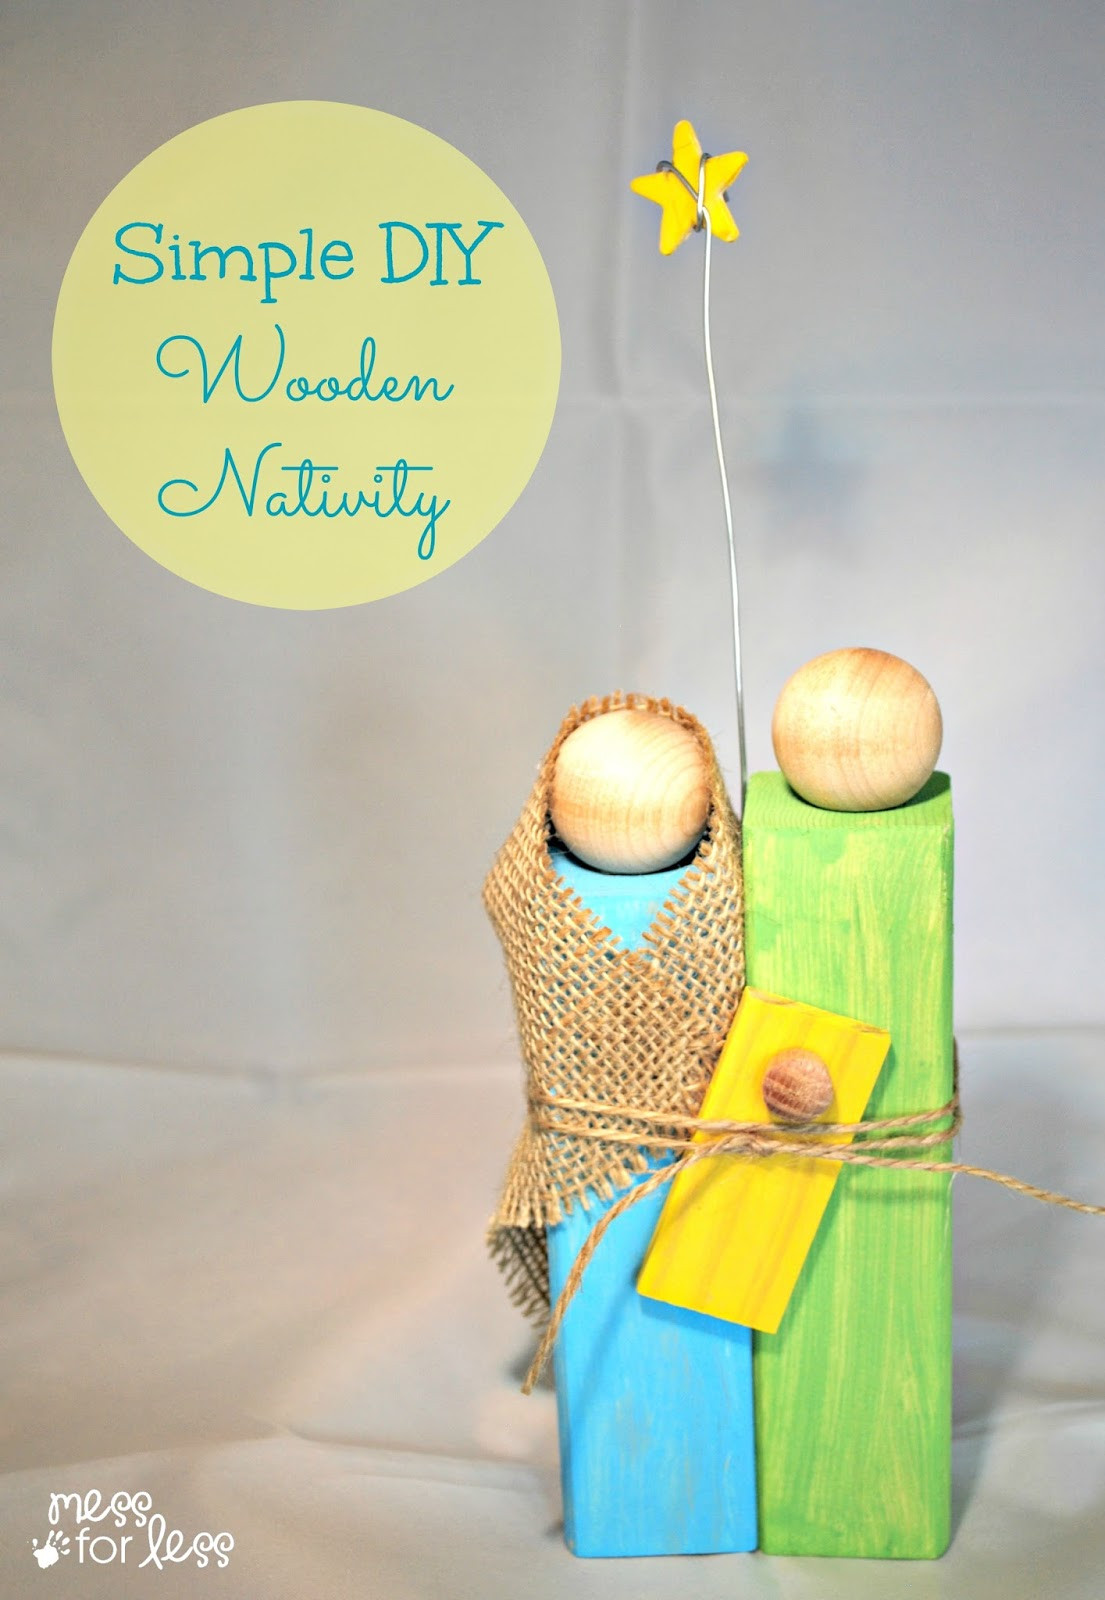 DIY Woodworking Christmas Gifts
 Homemade Christmas Gifts Wooden Nativity Craft Mess